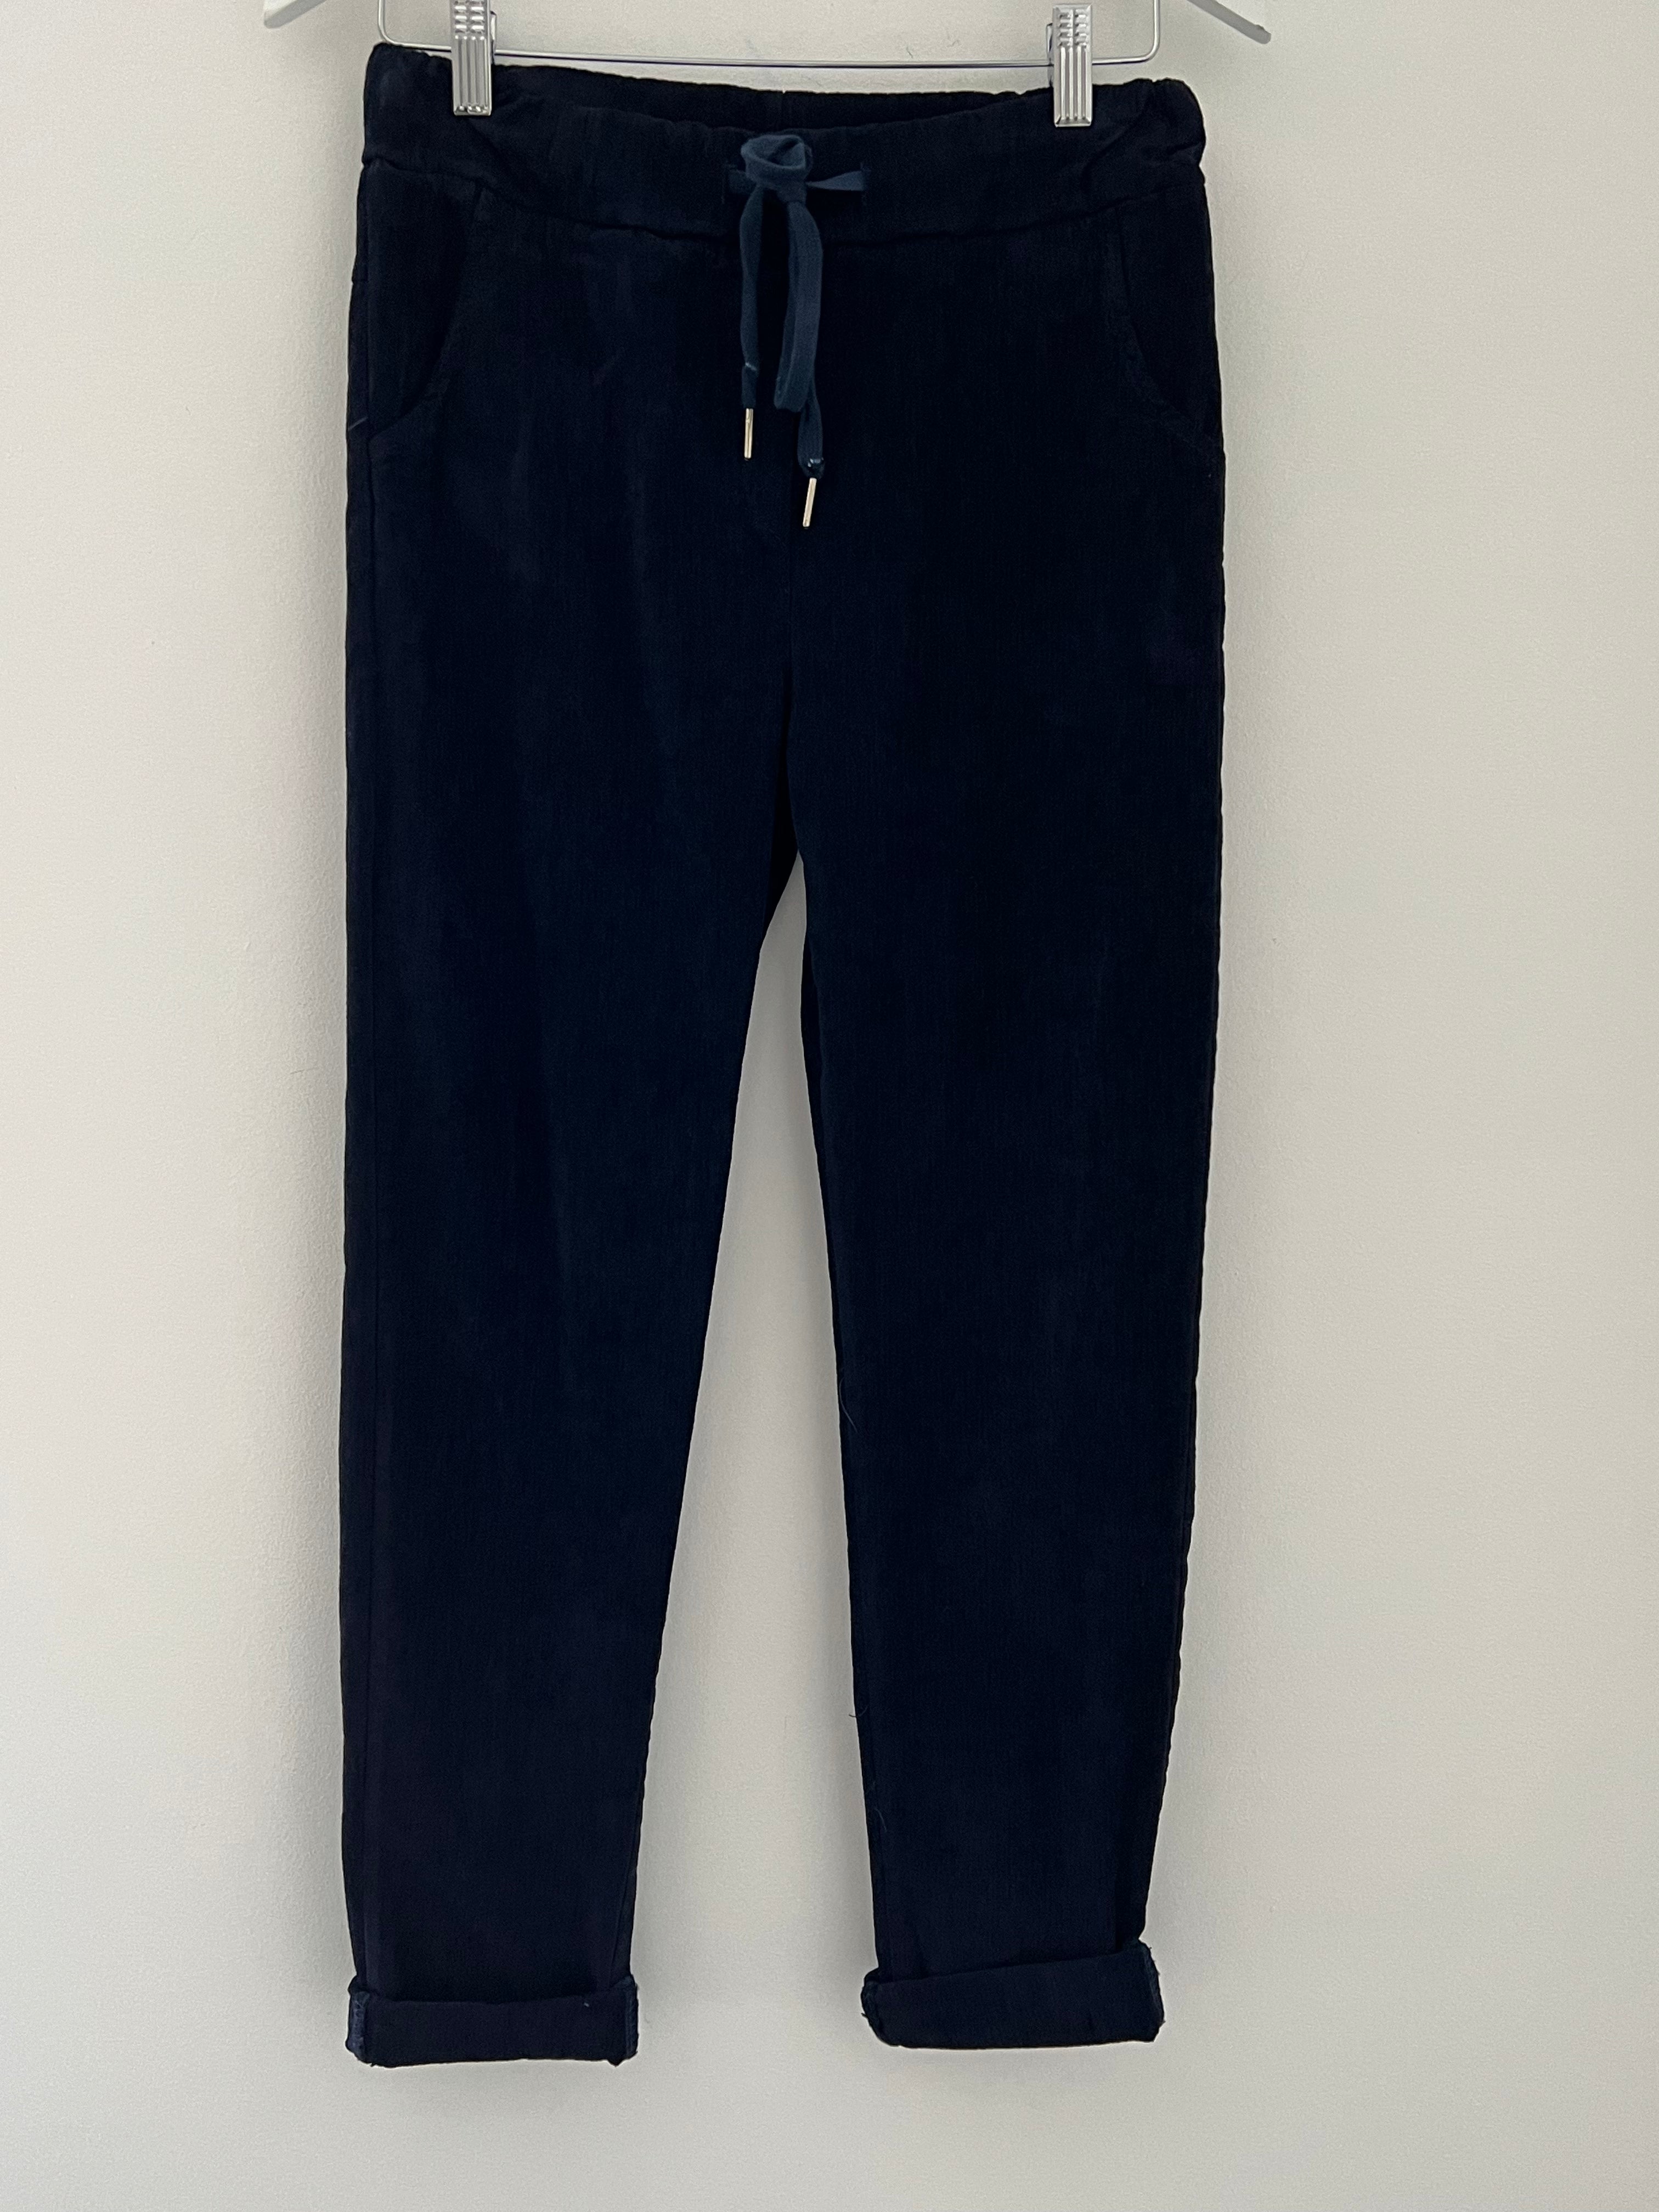 Slimfit Needlecord Joggers in Ink